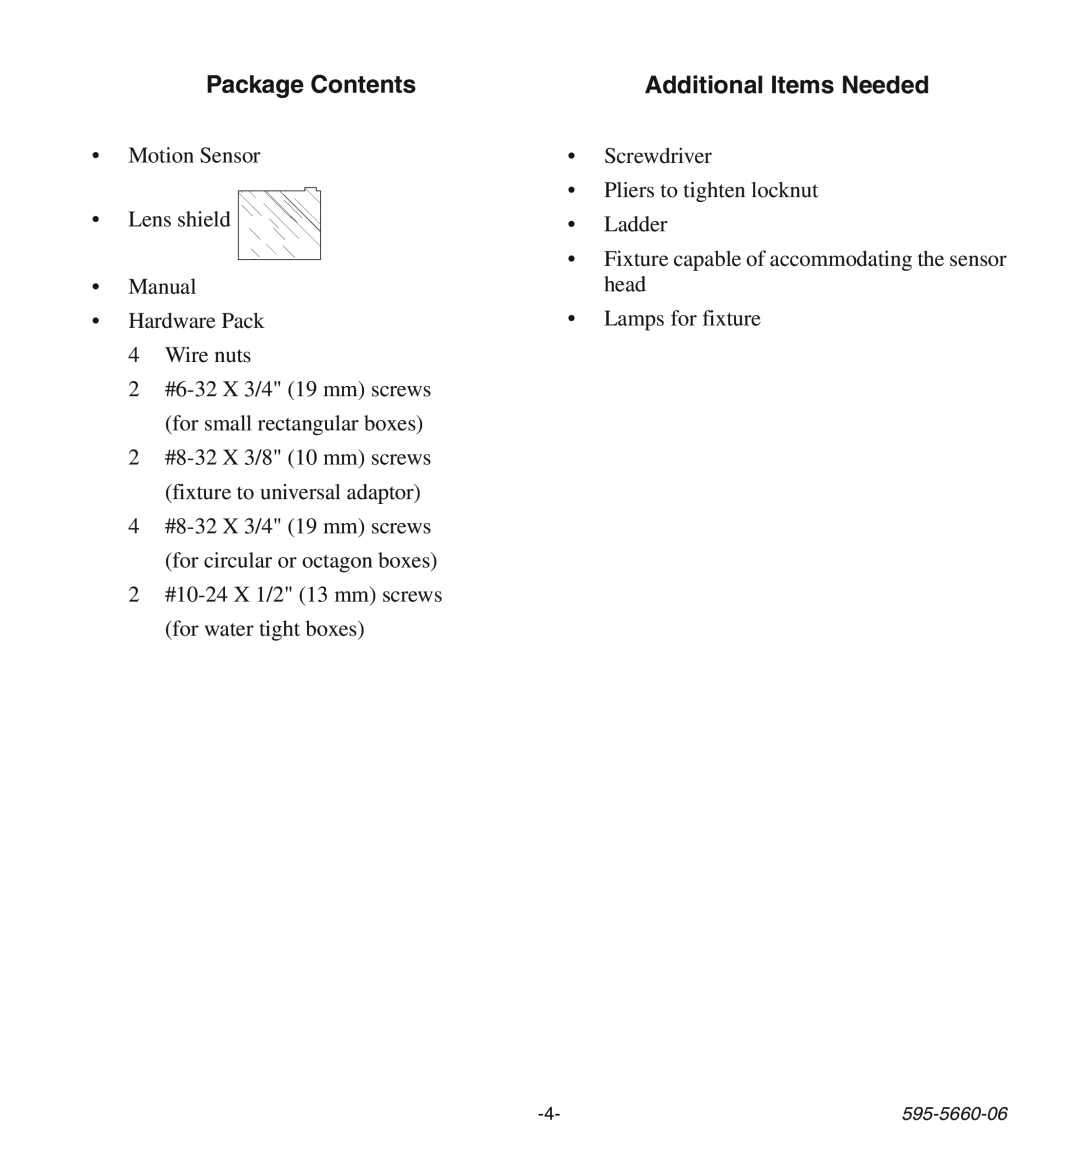 Desa HD-9140 manual Package Contents, Additional Items Needed 